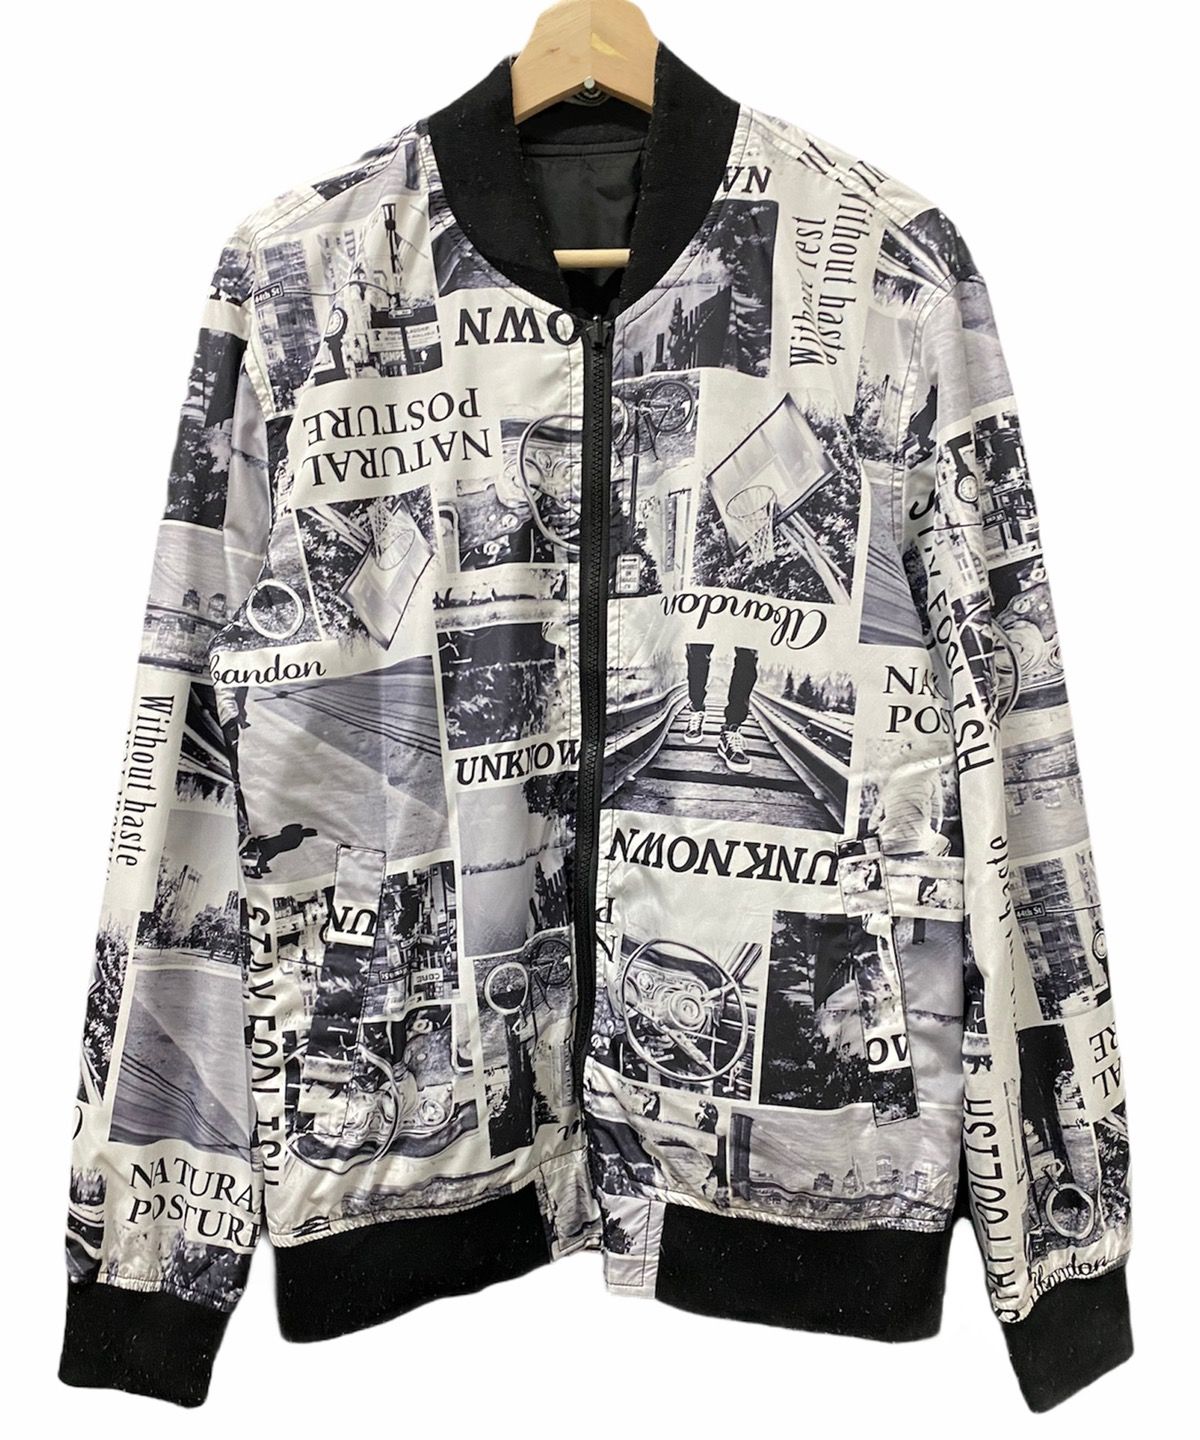 Archival Clothing - SUGGESTION🇯🇵NEWSPAPER GRAPHICS BOMBER JACKET LIKE SUPREME - 1